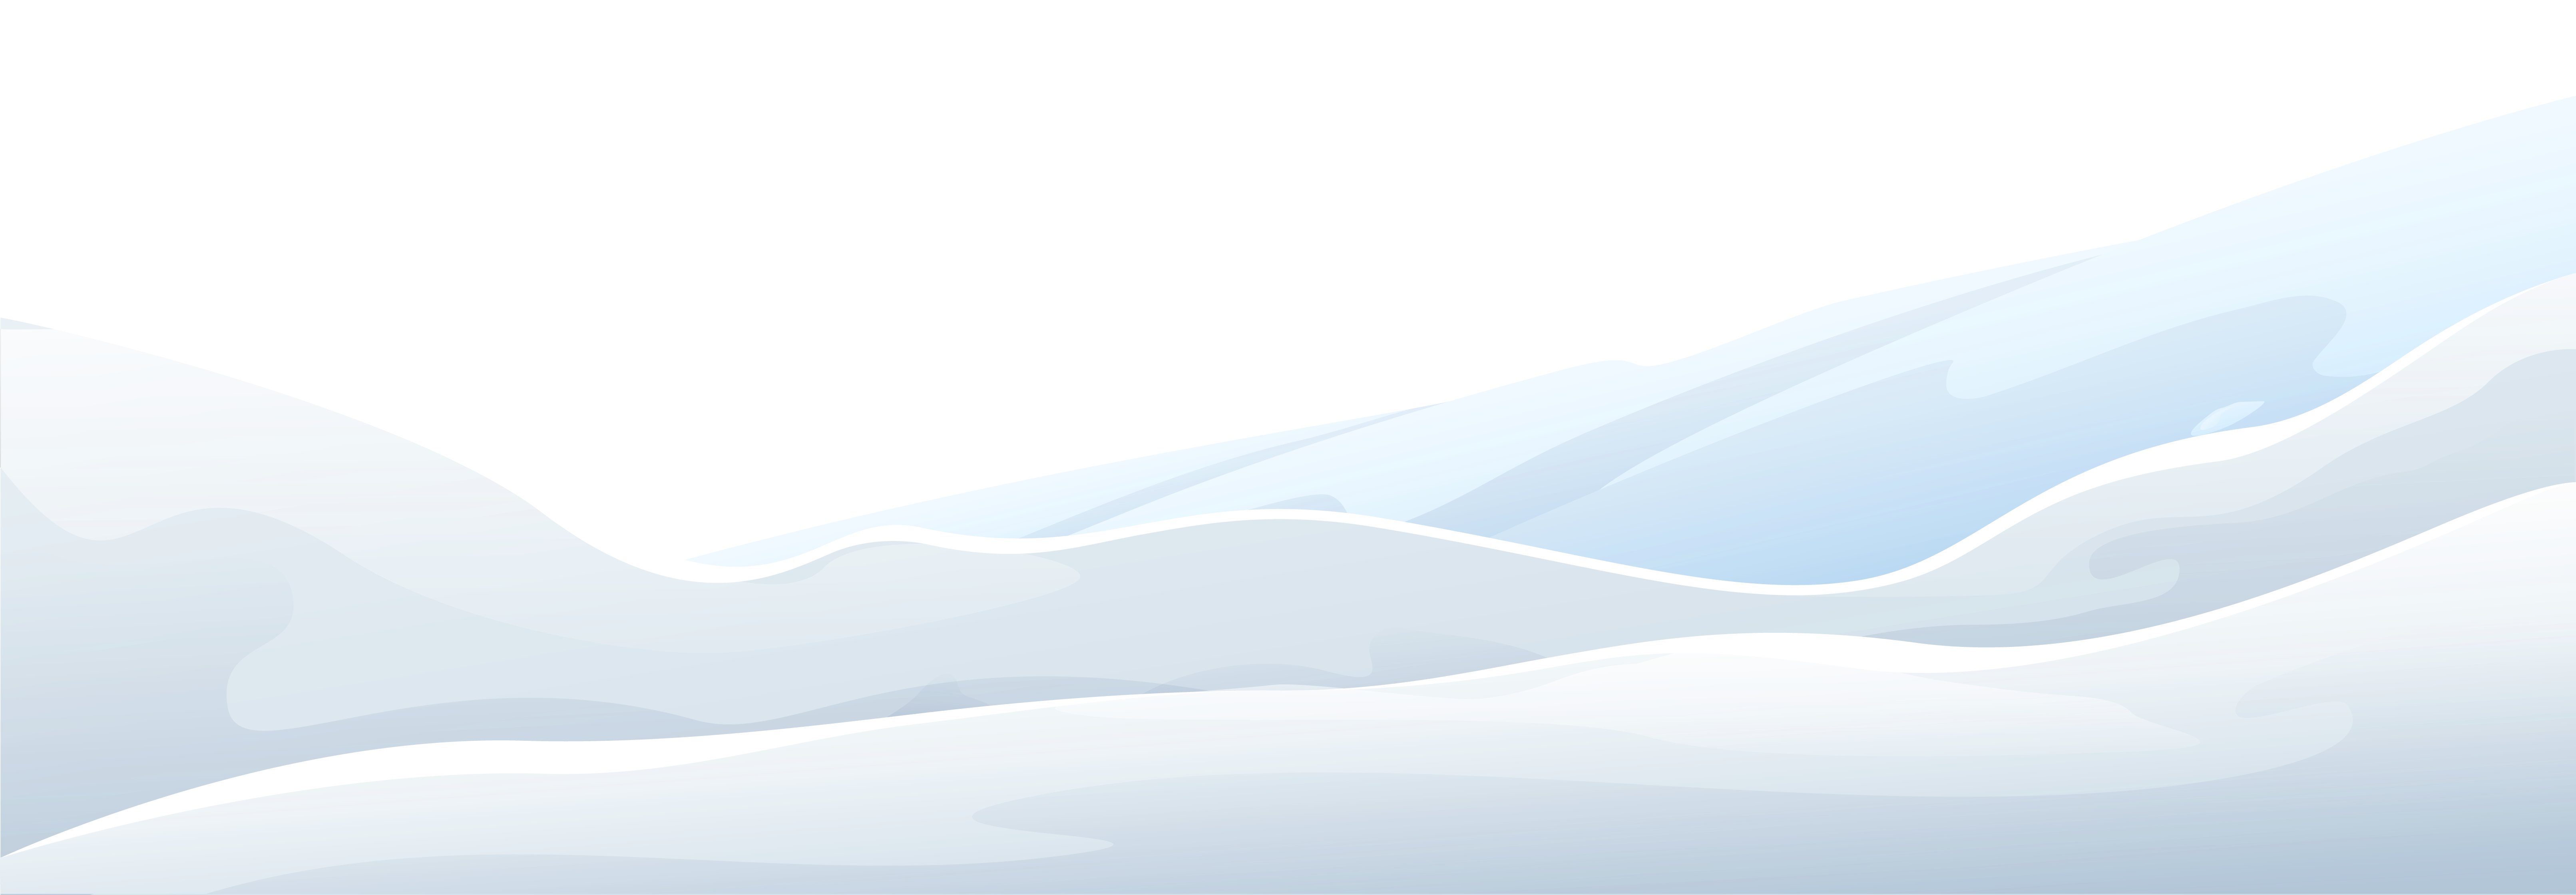 Snow Winter Ground PNG Clipart Image 